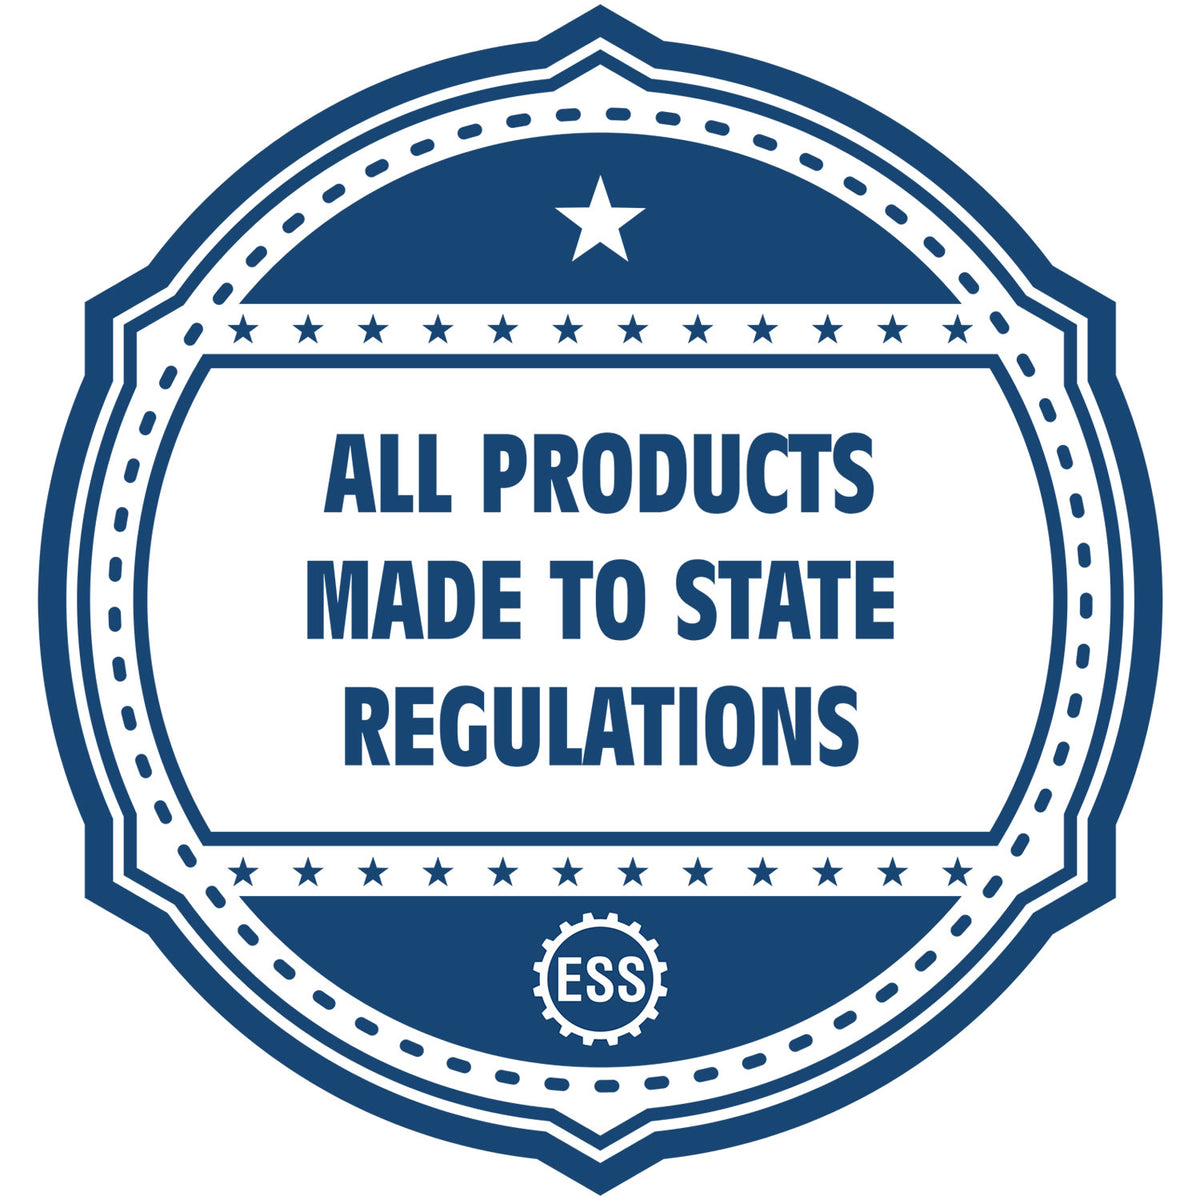 An icon or badge element for the Slim Pre-Inked Rectangular Notary Stamp for North Dakota showing that this product is made in compliance with state regulations.